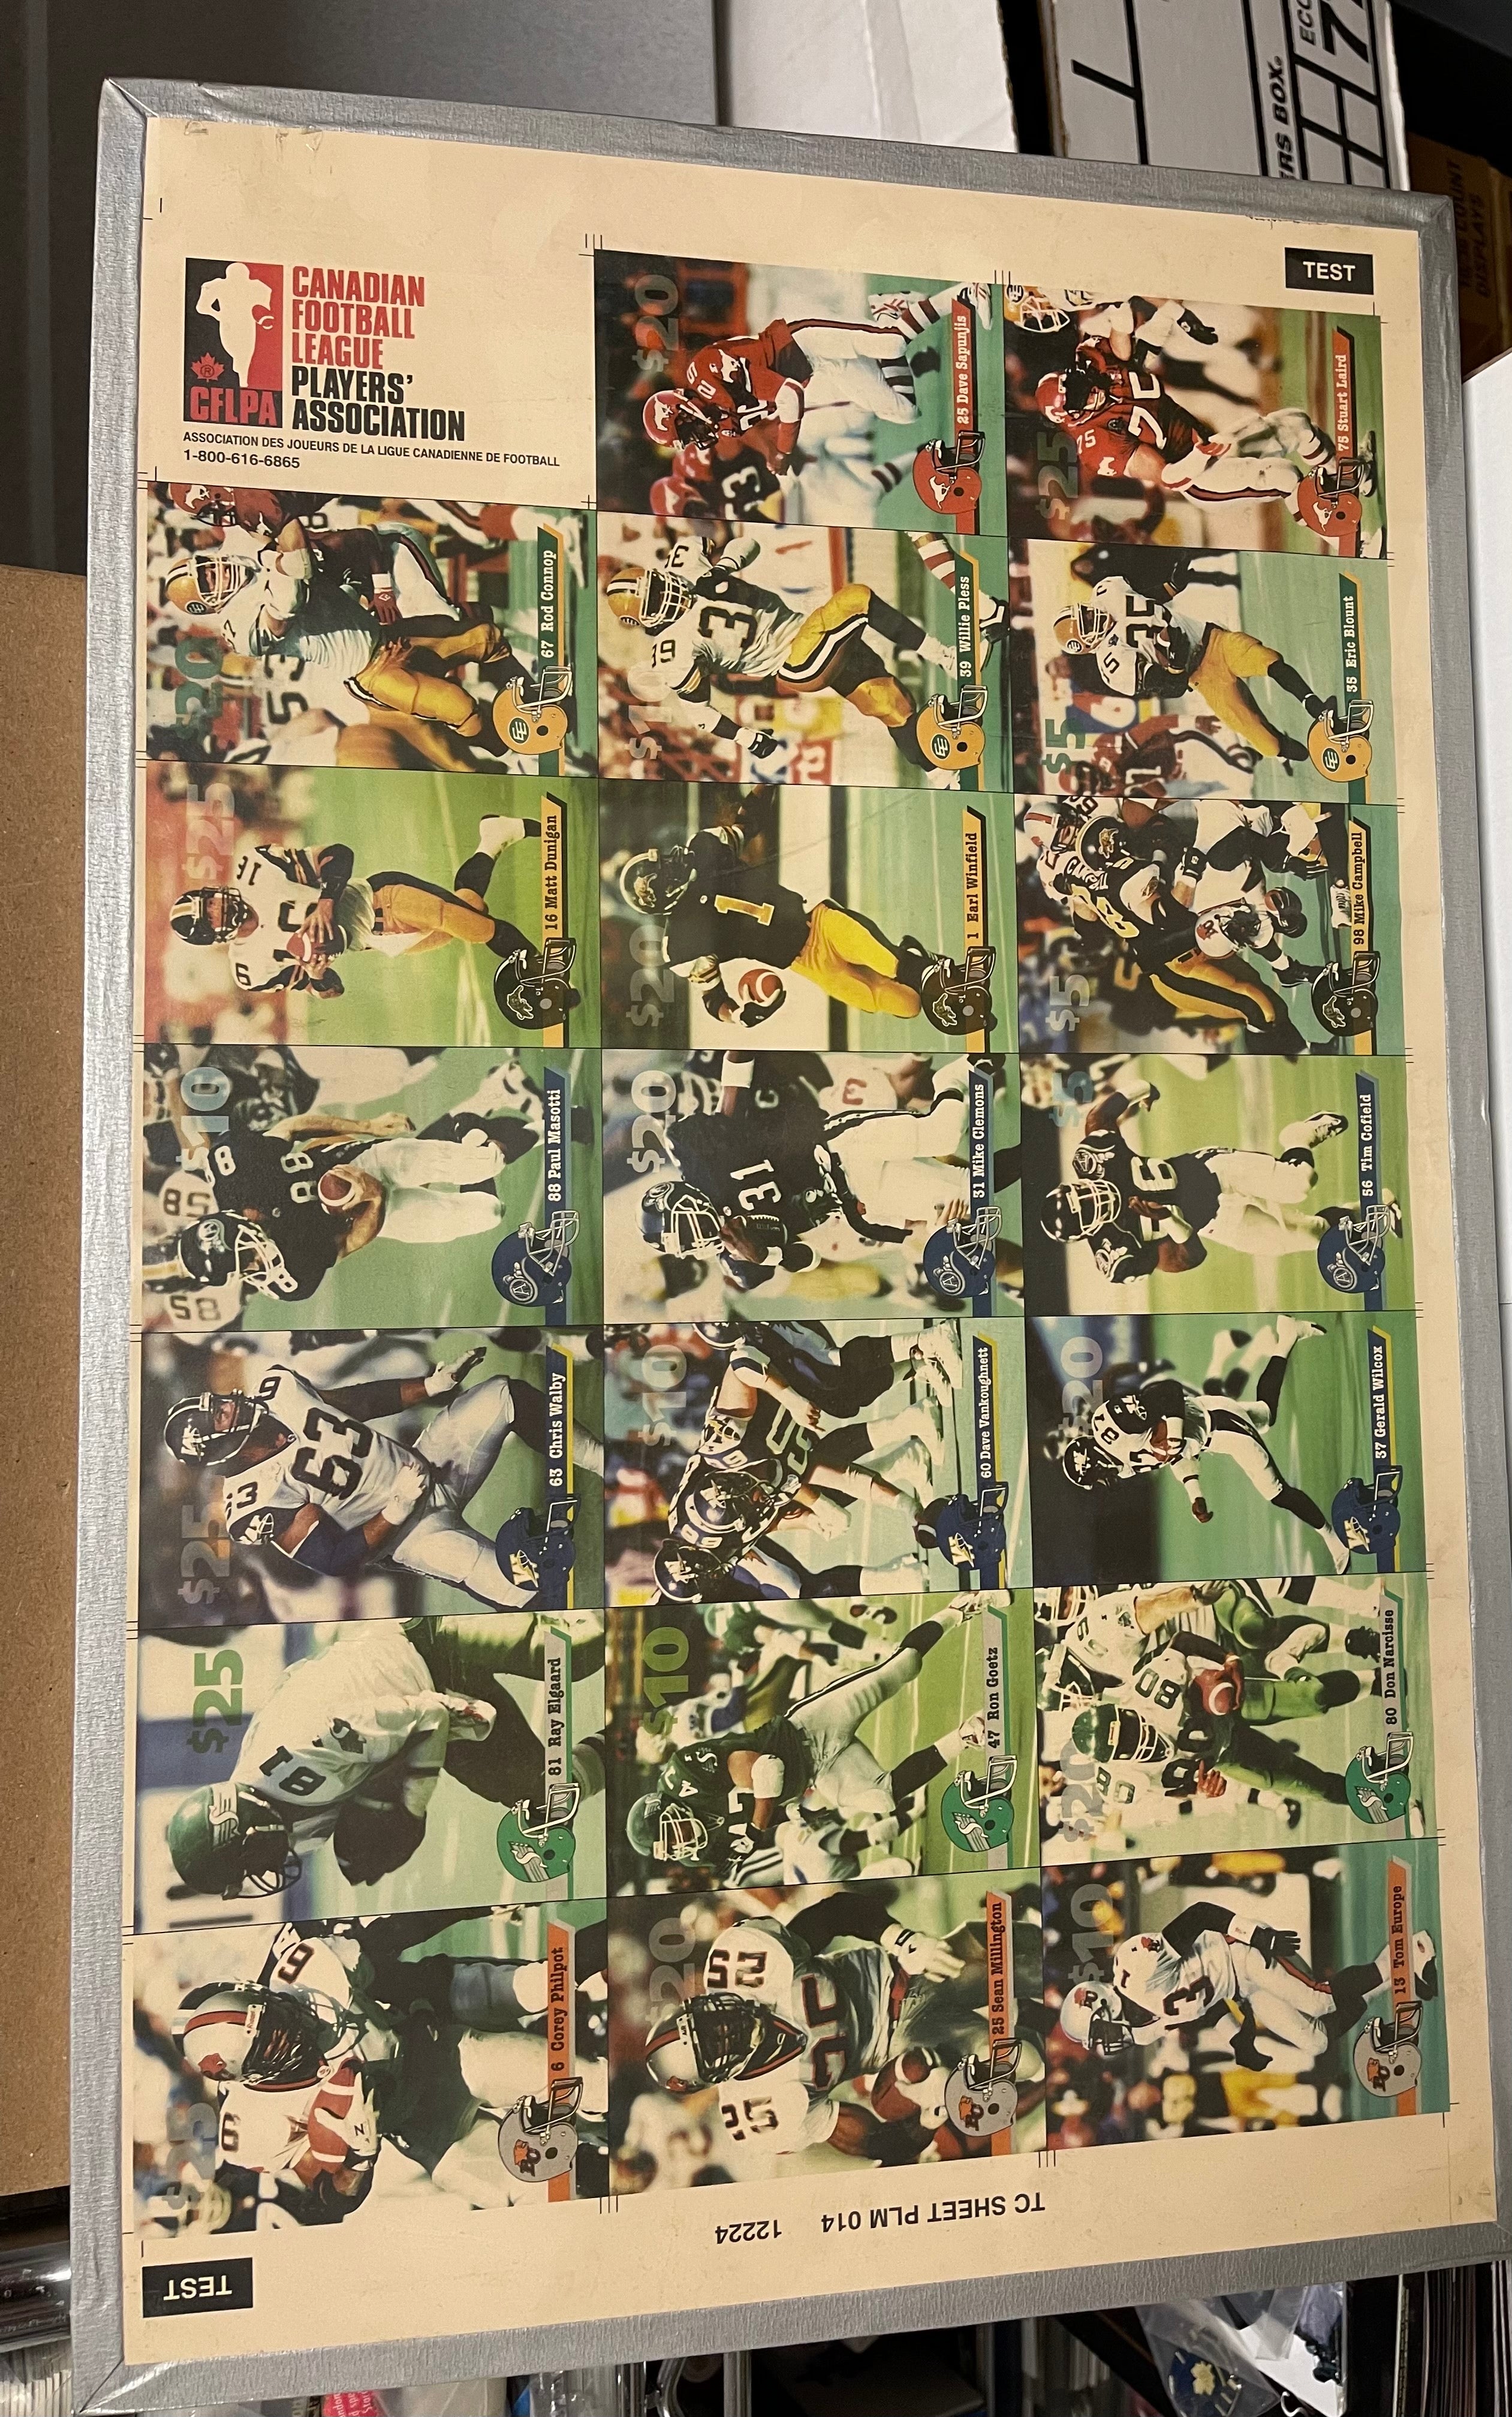 CFL football rare test issued uncut cards sheet shrink wrapped 1990s